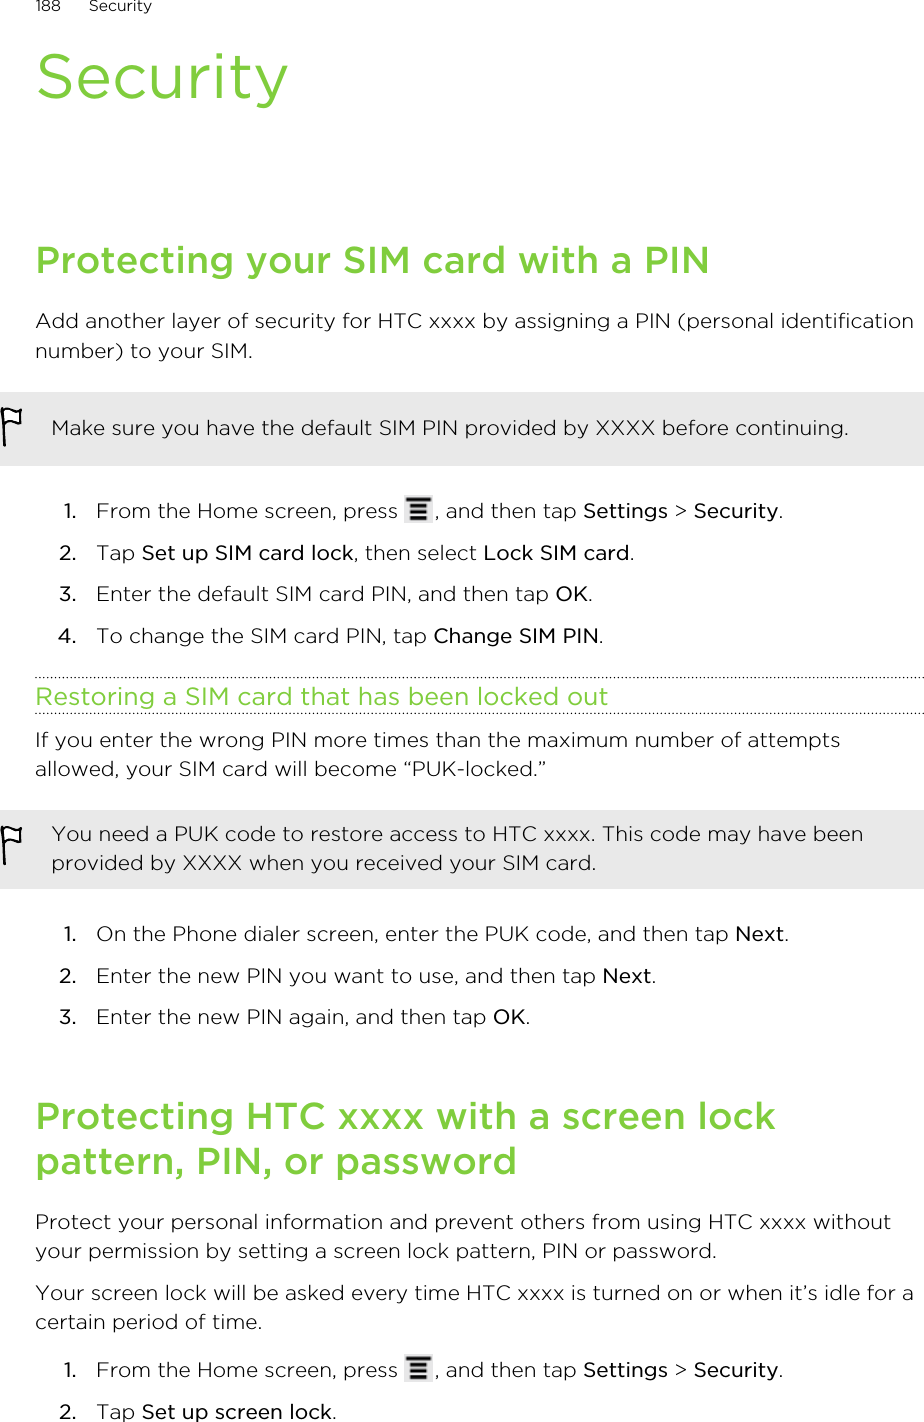 SecurityProtecting your SIM card with a PINAdd another layer of security for HTC xxxx by assigning a PIN (personal identificationnumber) to your SIM.Make sure you have the default SIM PIN provided by XXXX before continuing.1. From the Home screen, press  , and then tap Settings &gt; Security.2. Tap Set up SIM card lock, then select Lock SIM card.3. Enter the default SIM card PIN, and then tap OK.4. To change the SIM card PIN, tap Change SIM PIN.Restoring a SIM card that has been locked outIf you enter the wrong PIN more times than the maximum number of attemptsallowed, your SIM card will become “PUK-locked.”You need a PUK code to restore access to HTC xxxx. This code may have beenprovided by XXXX when you received your SIM card.1. On the Phone dialer screen, enter the PUK code, and then tap Next.2. Enter the new PIN you want to use, and then tap Next.3. Enter the new PIN again, and then tap OK.Protecting HTC xxxx with a screen lockpattern, PIN, or passwordProtect your personal information and prevent others from using HTC xxxx withoutyour permission by setting a screen lock pattern, PIN or password.Your screen lock will be asked every time HTC xxxx is turned on or when it’s idle for acertain period of time.1. From the Home screen, press  , and then tap Settings &gt; Security.2. Tap Set up screen lock.188 Security